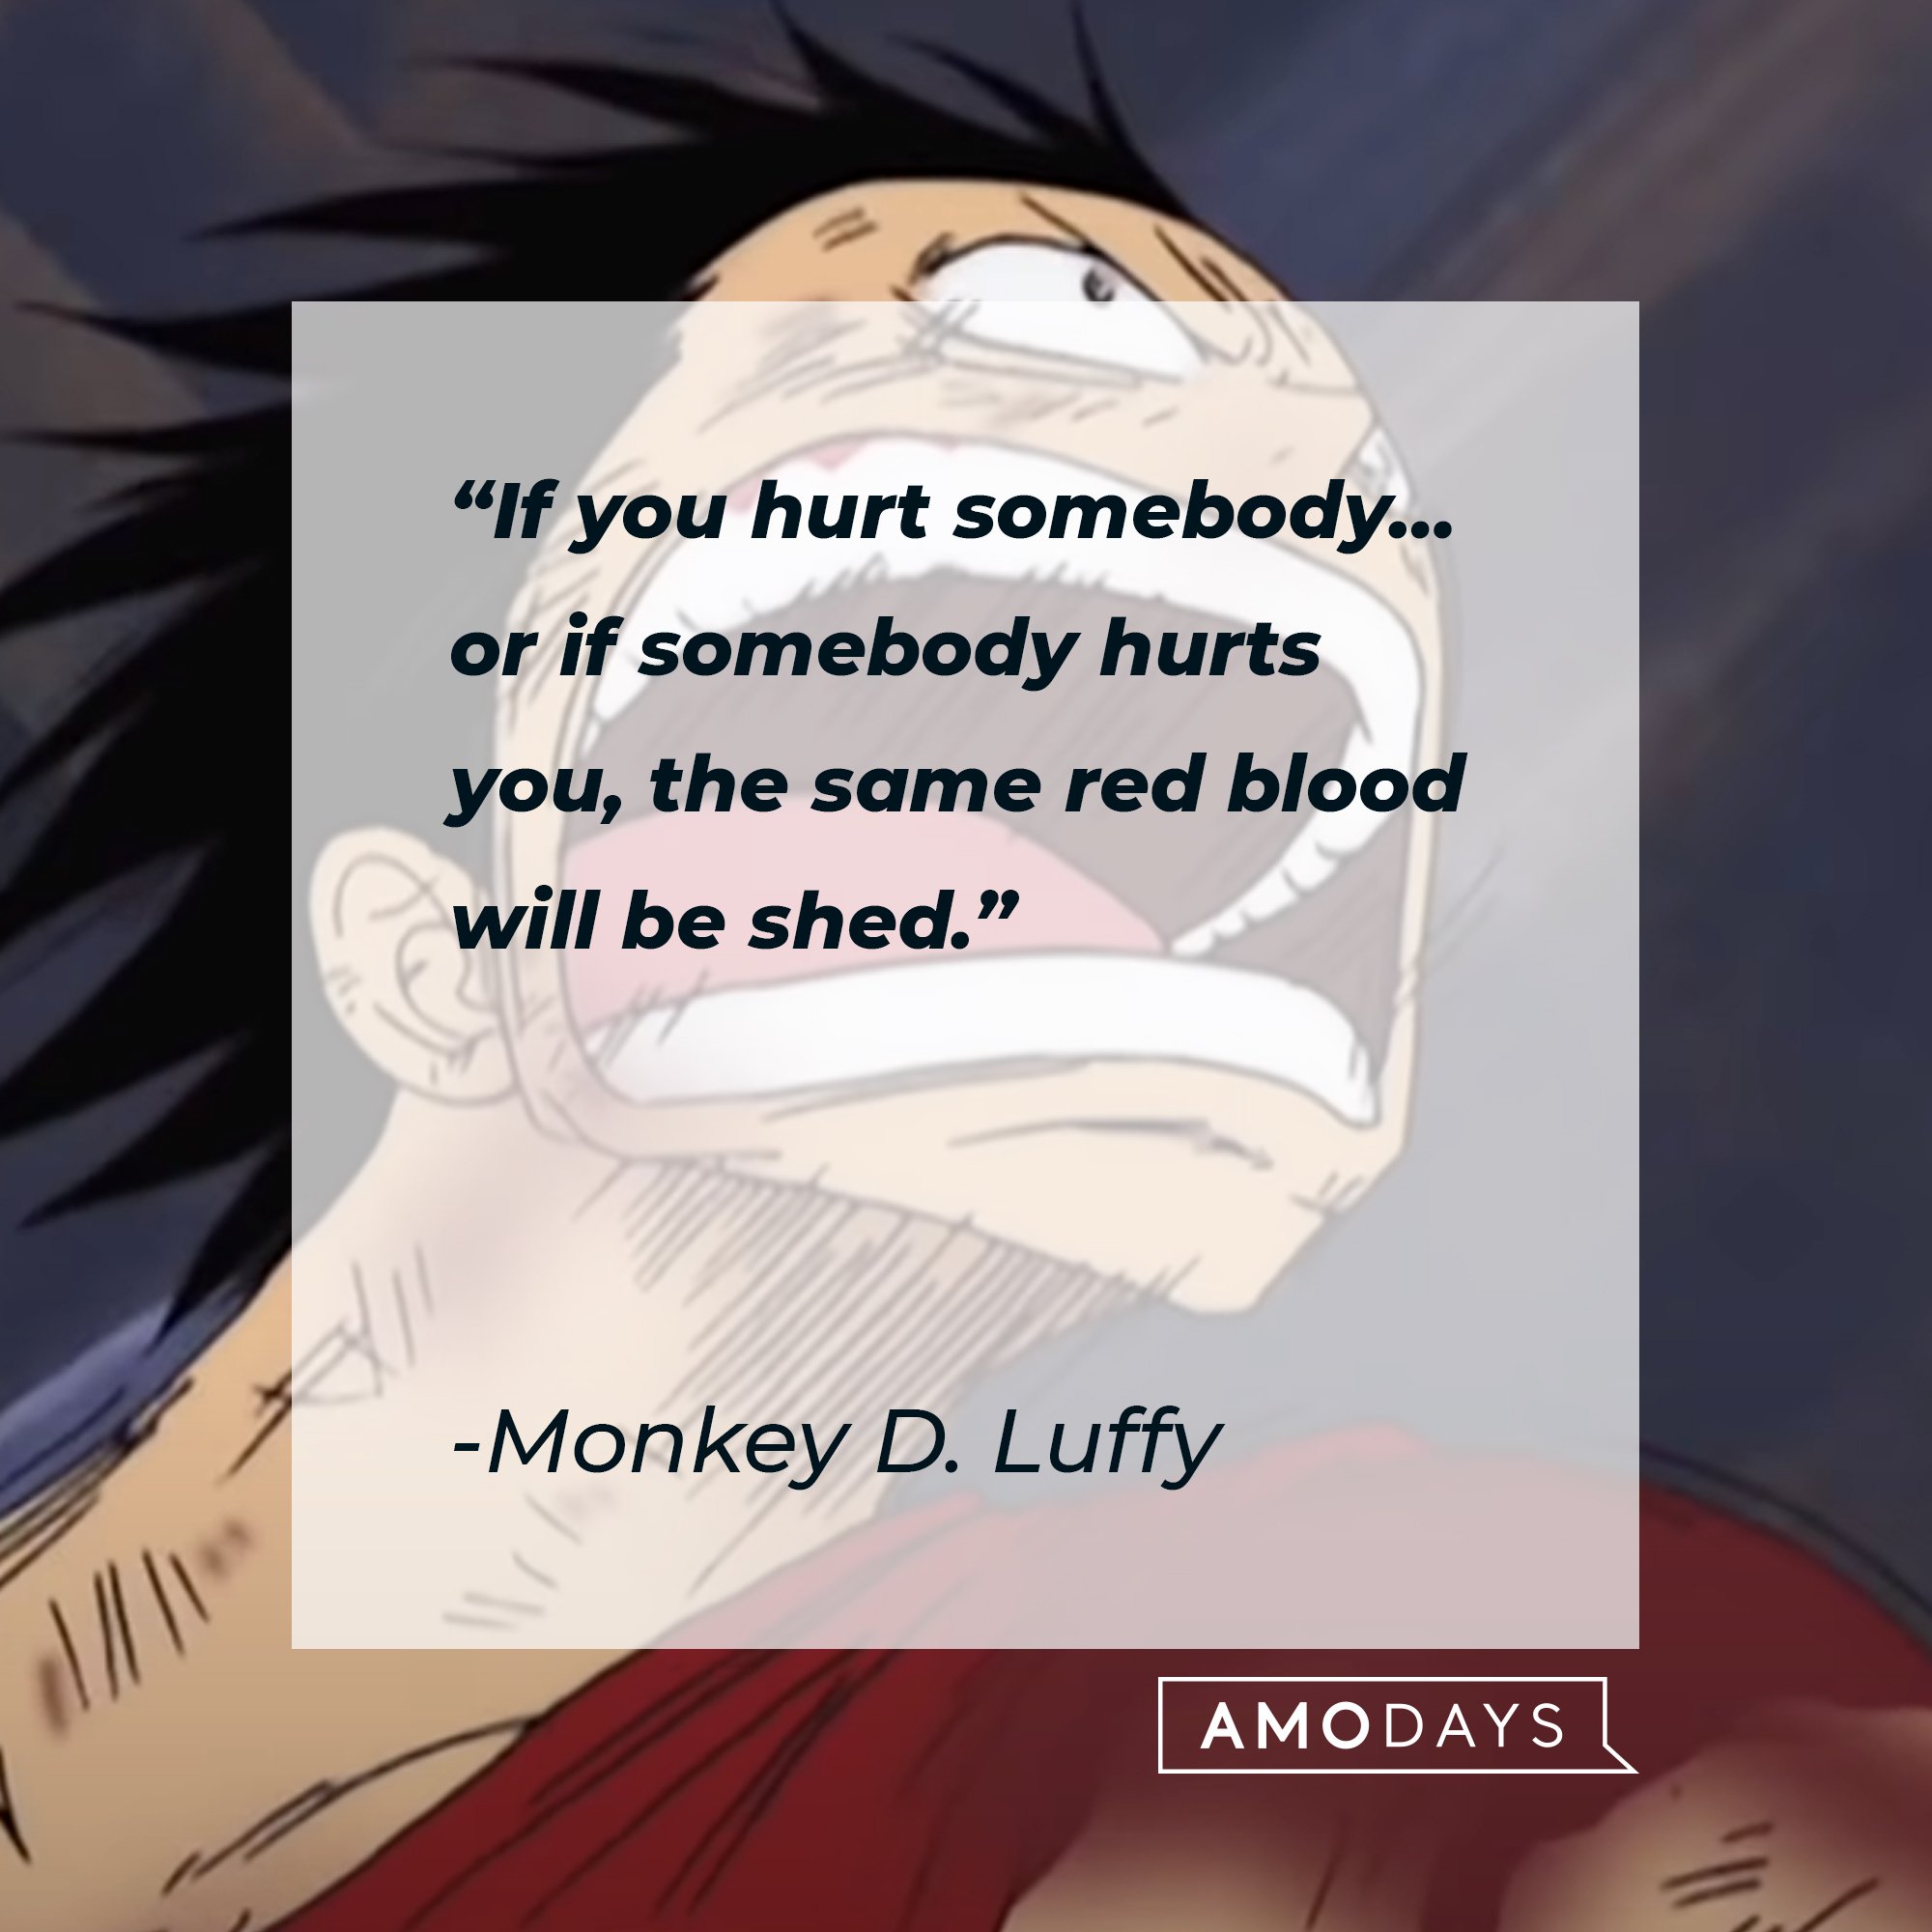 Monkey D. Luffy's quote: "If you hurt somebody… or if somebody hurts you, the same red blood will be shed." | Image: AmoDays